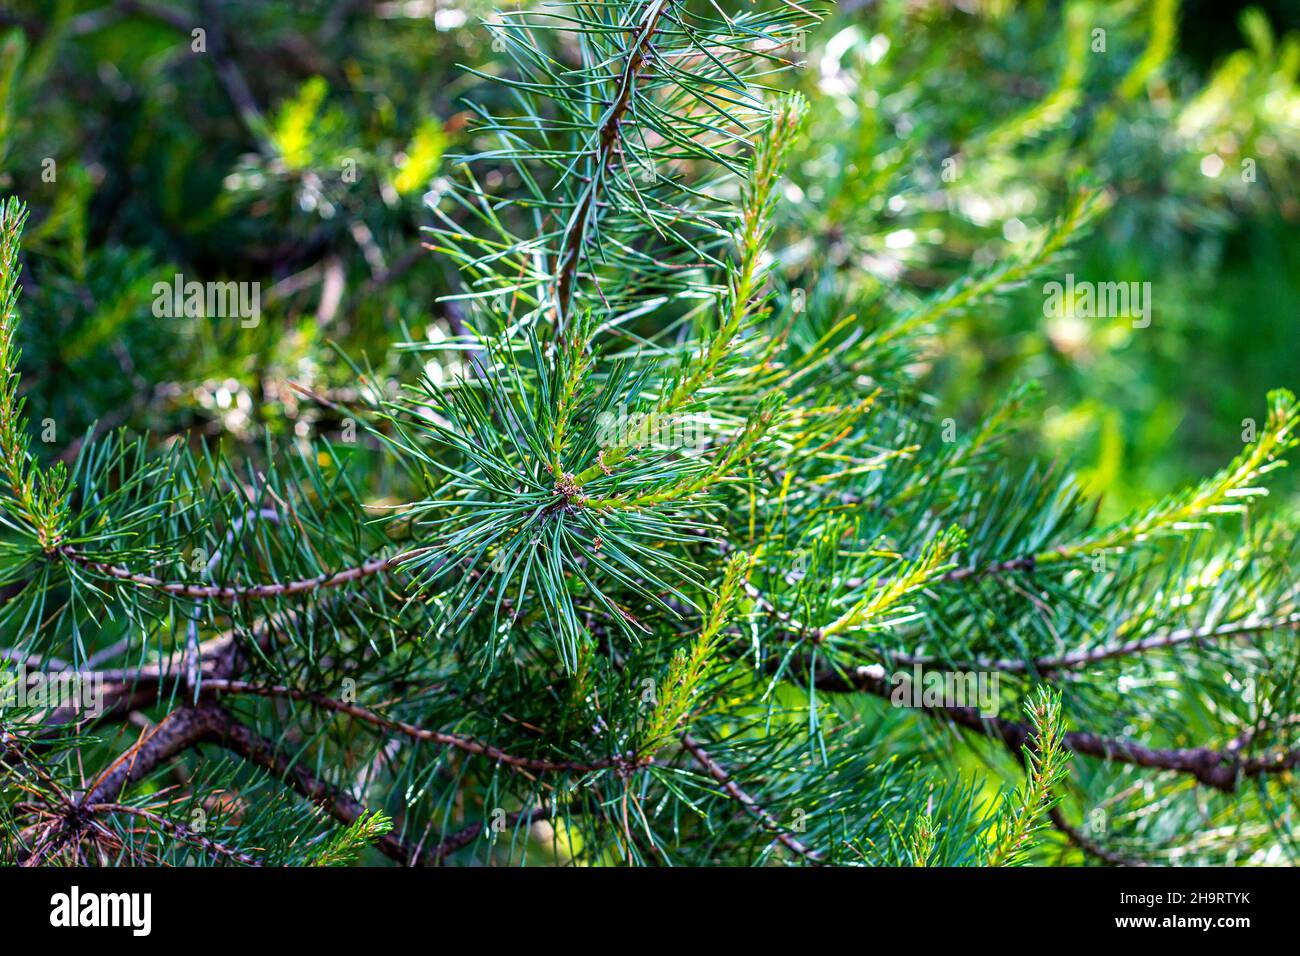 Fresh evergreen pine twigs with green needles in the forest in spring and summer season. Stock Photo